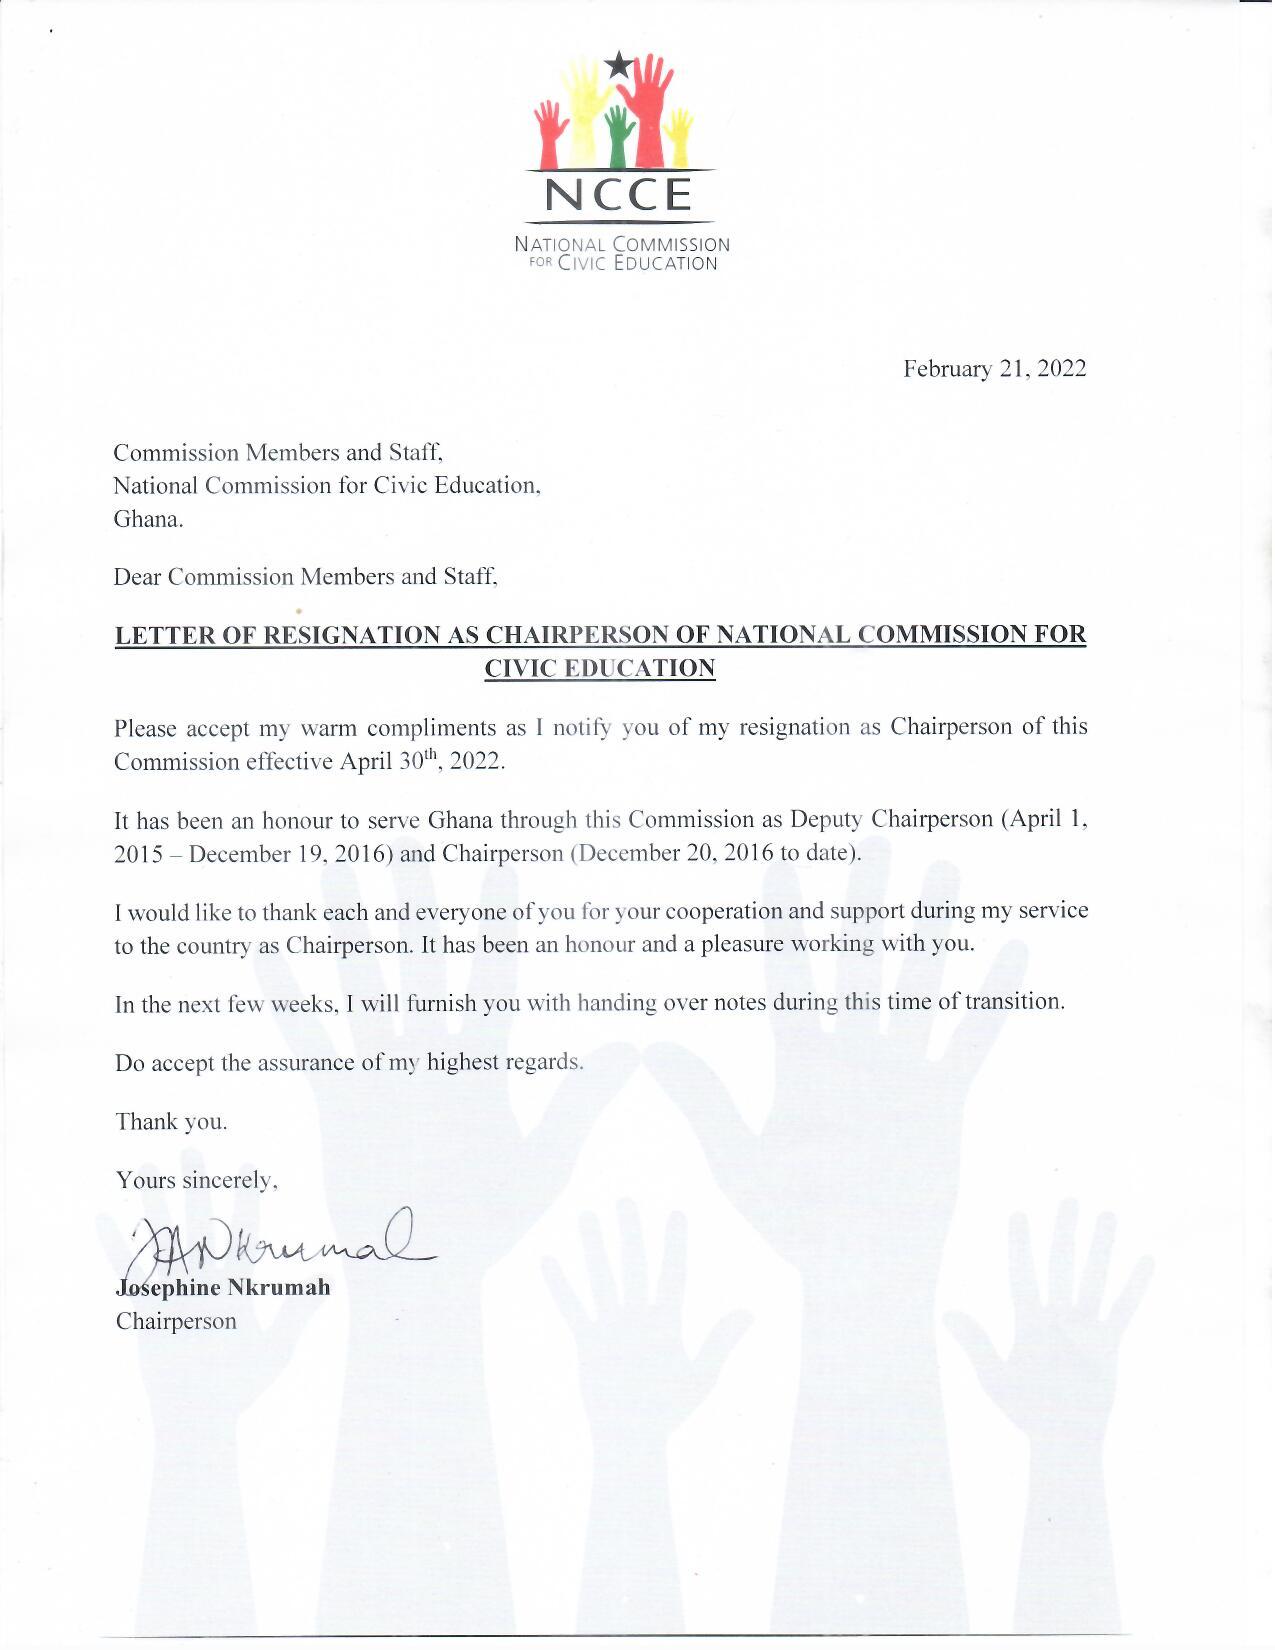 Josephine Nkrumah resigns as Chairperson of NCCE 